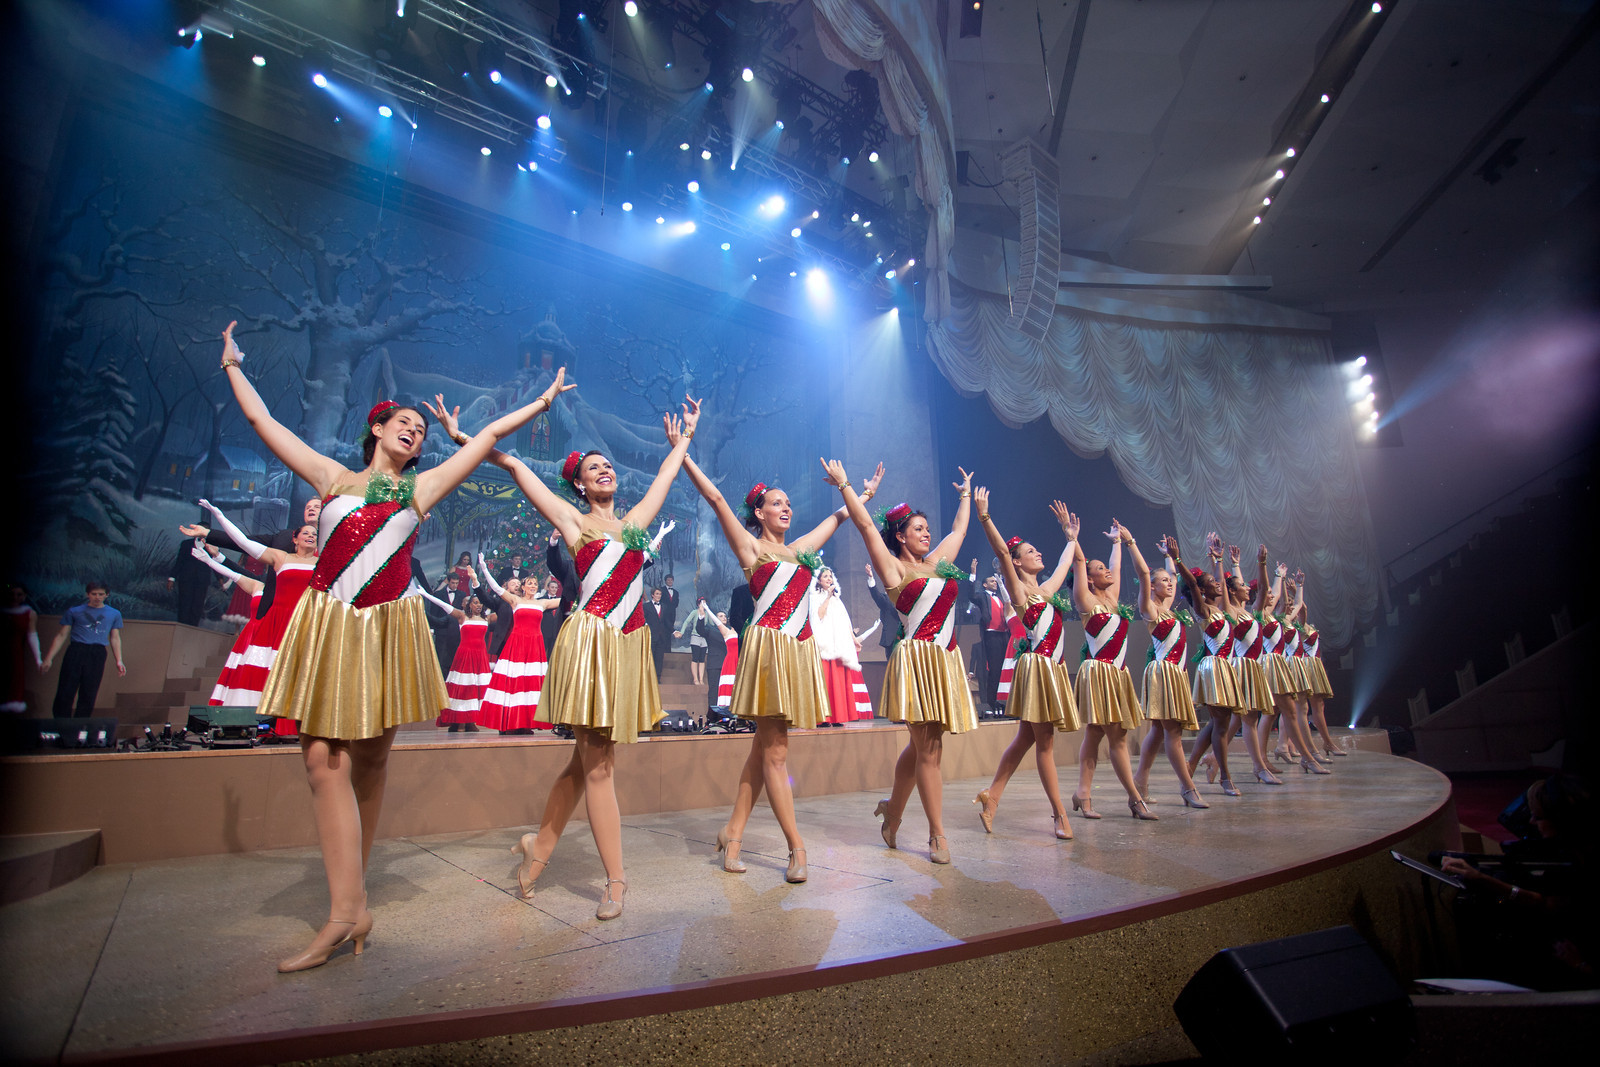 The Candy Cane Girls add a lot of flavor to the nightly performances.